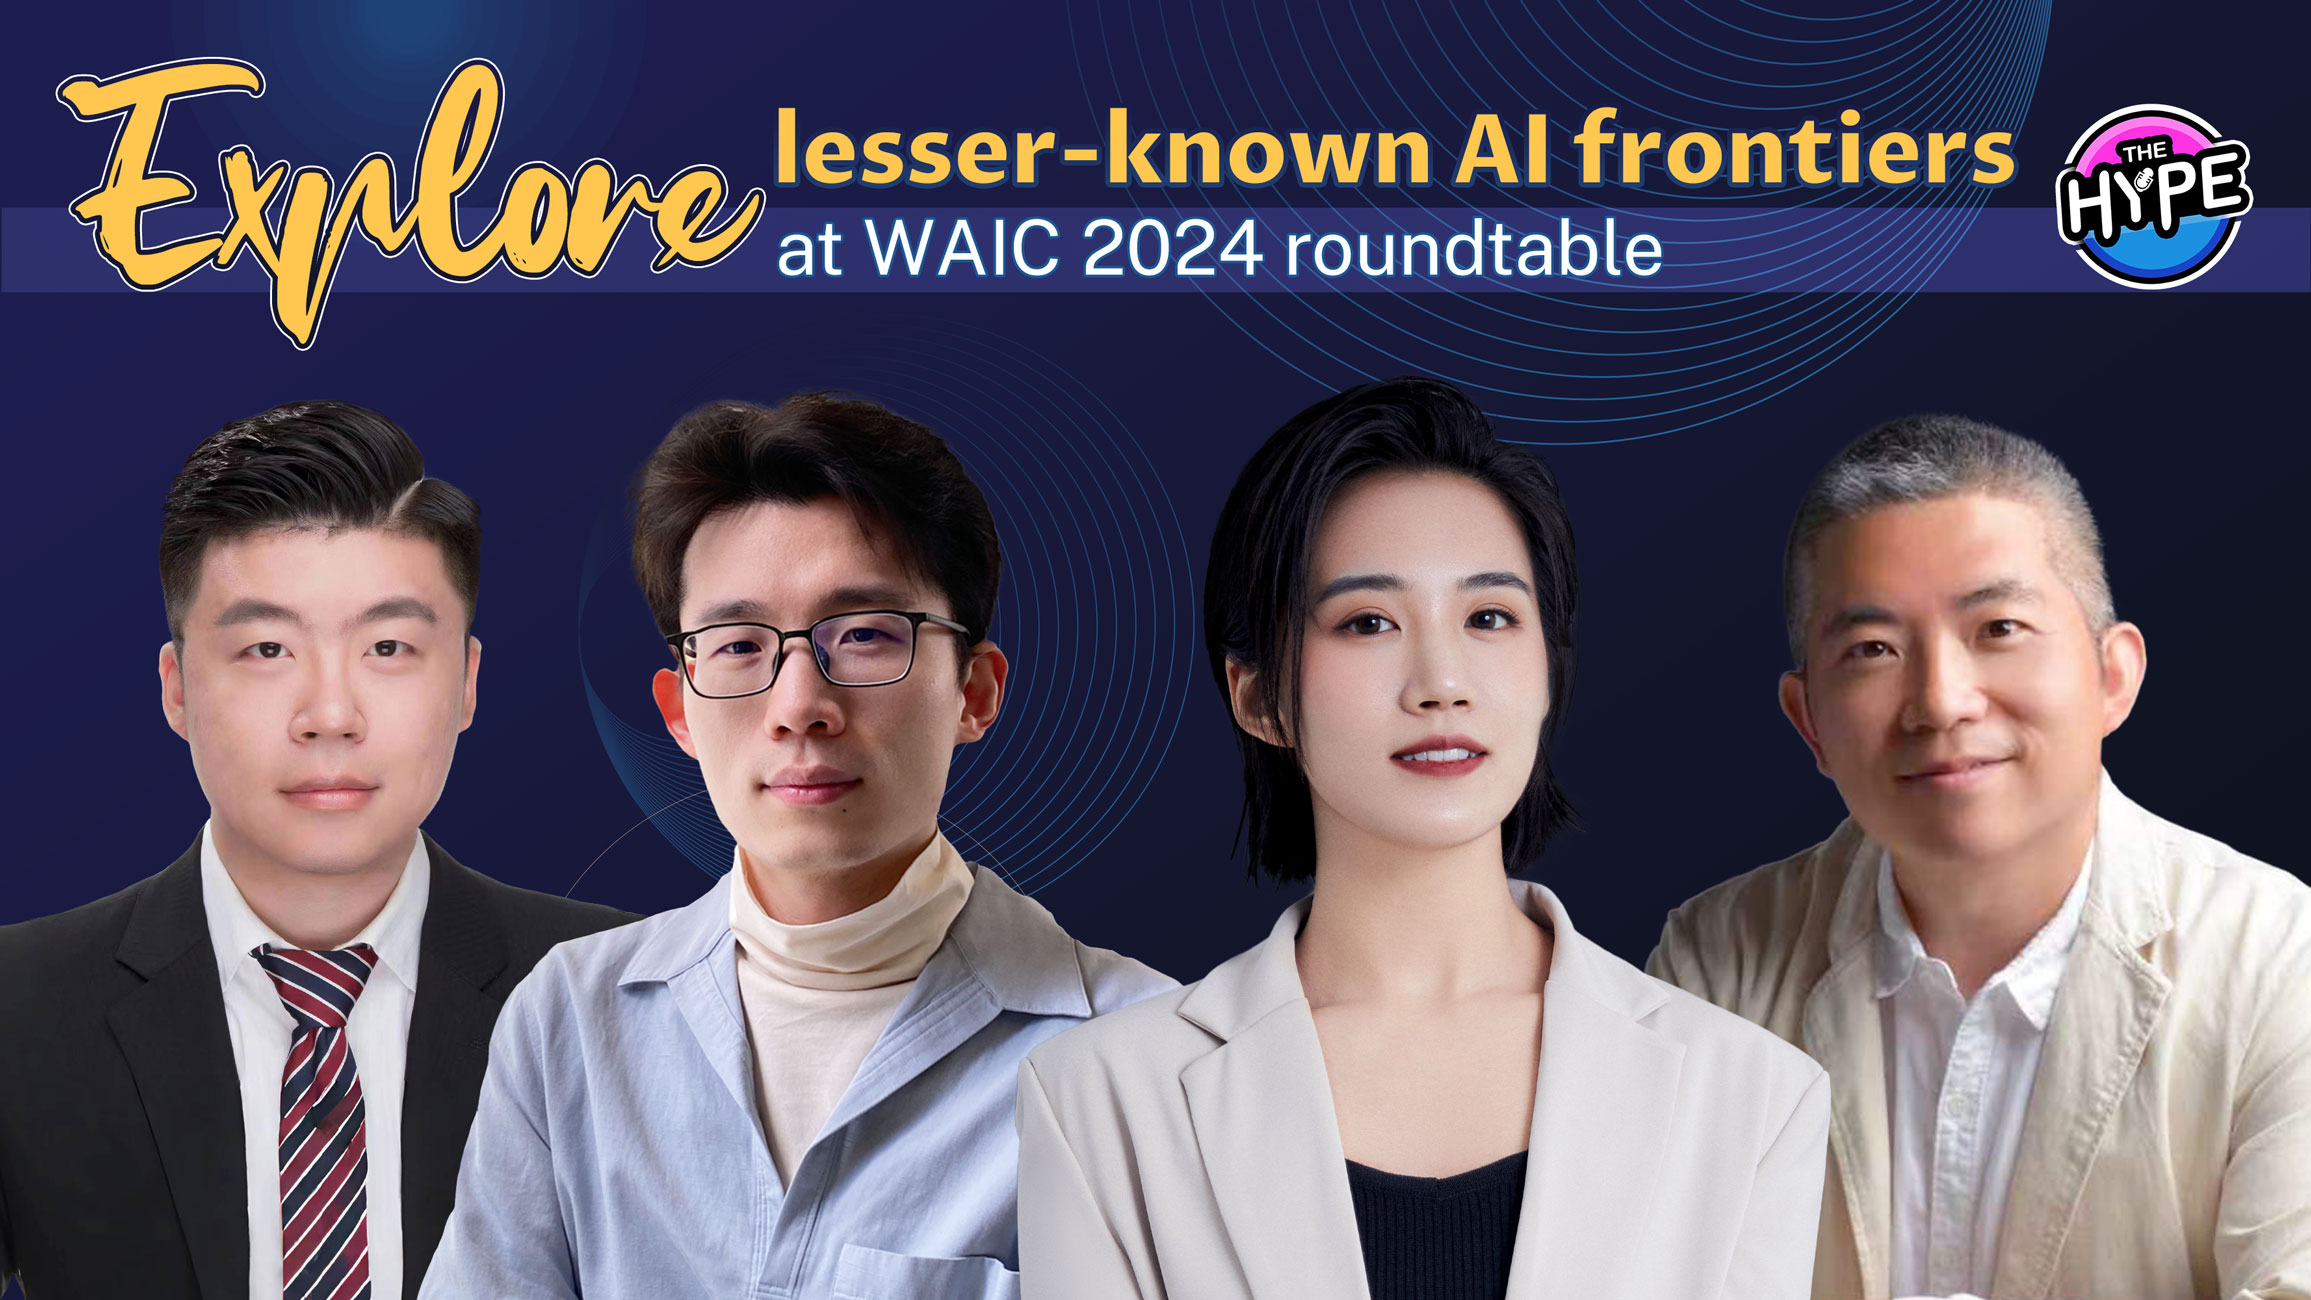 Live: The Hype – Explore lesser-known AI frontiers at WAIC 2024 roundtable